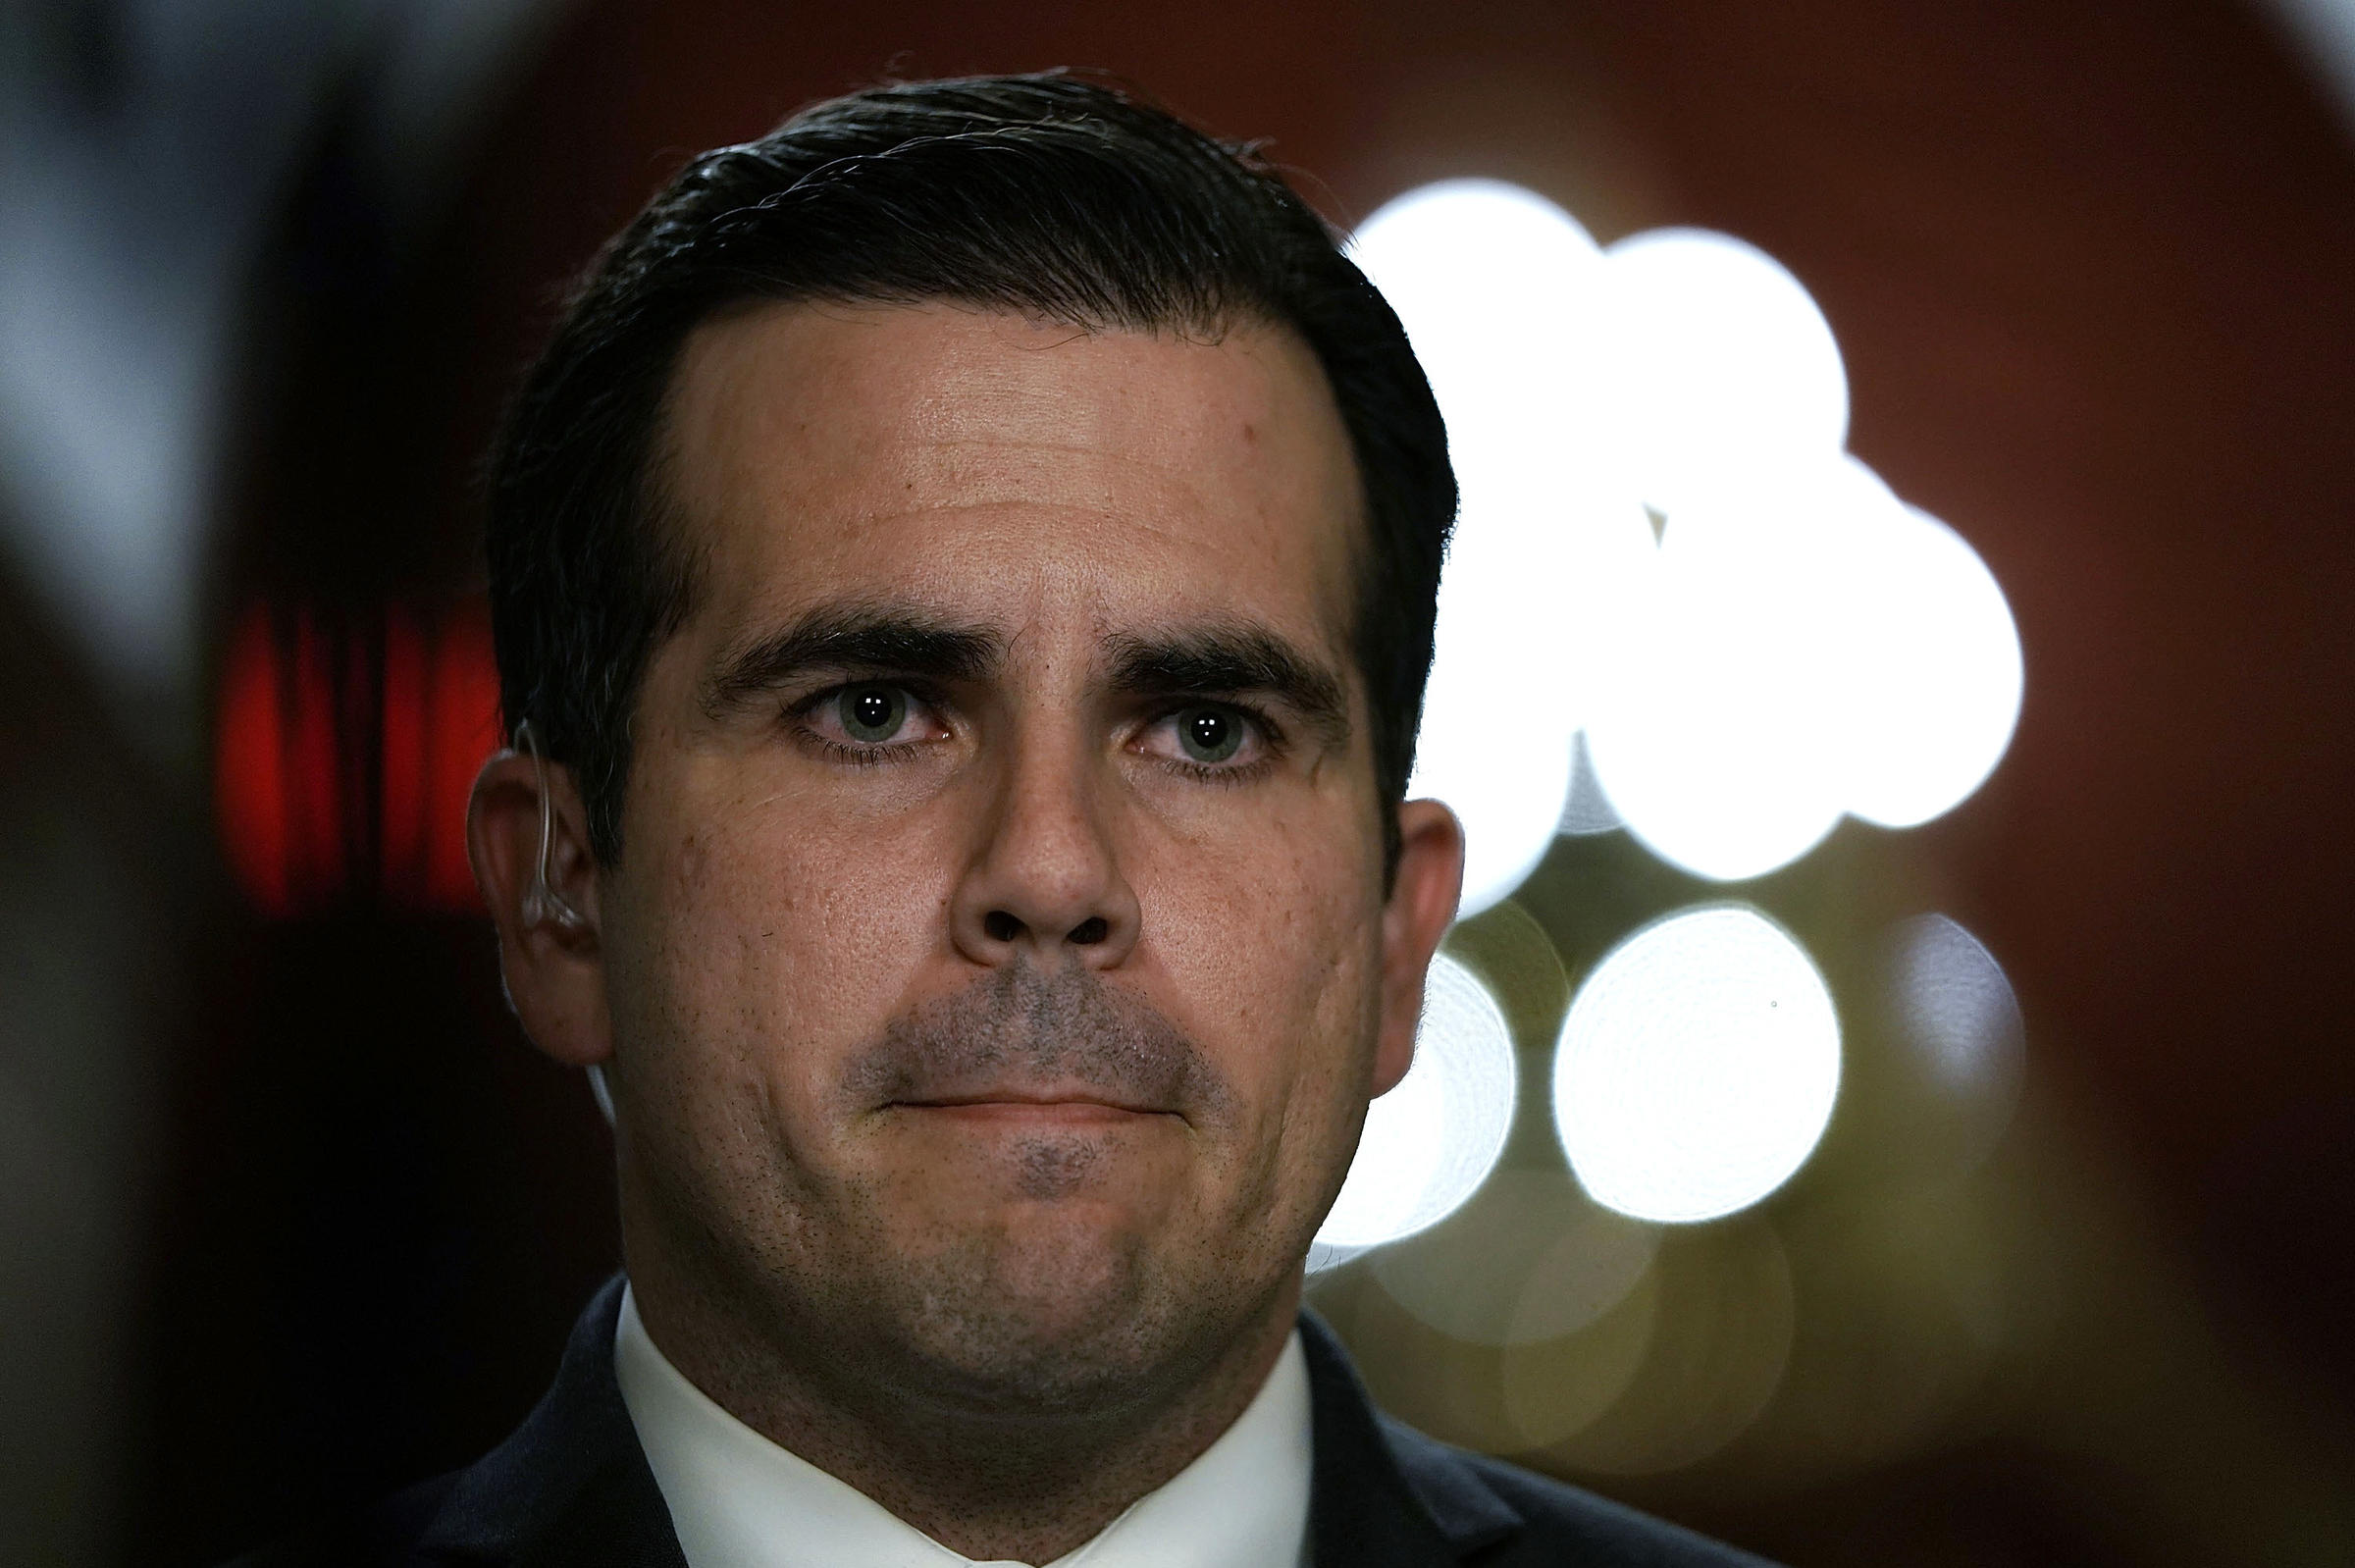 Puerto Rico Gov. Ricardo Rossello Says He Will Not Seek Reelection In